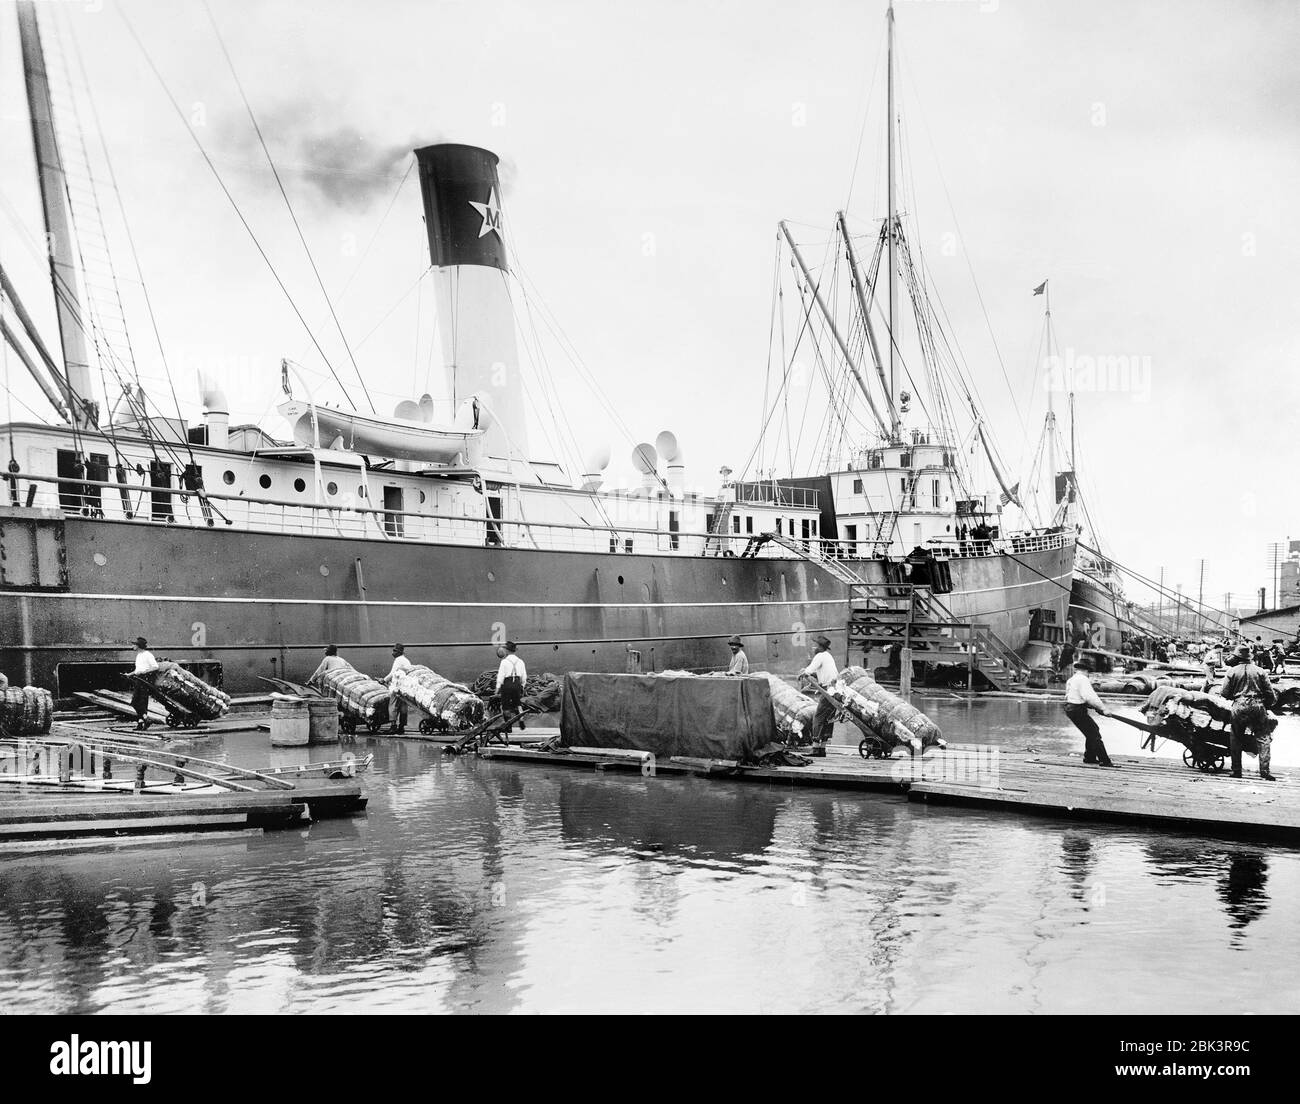 Loading Steamer during High Water, New Orleans, Louisiana, USA, Detroit Publishing Company, March 1903 Stock Photo